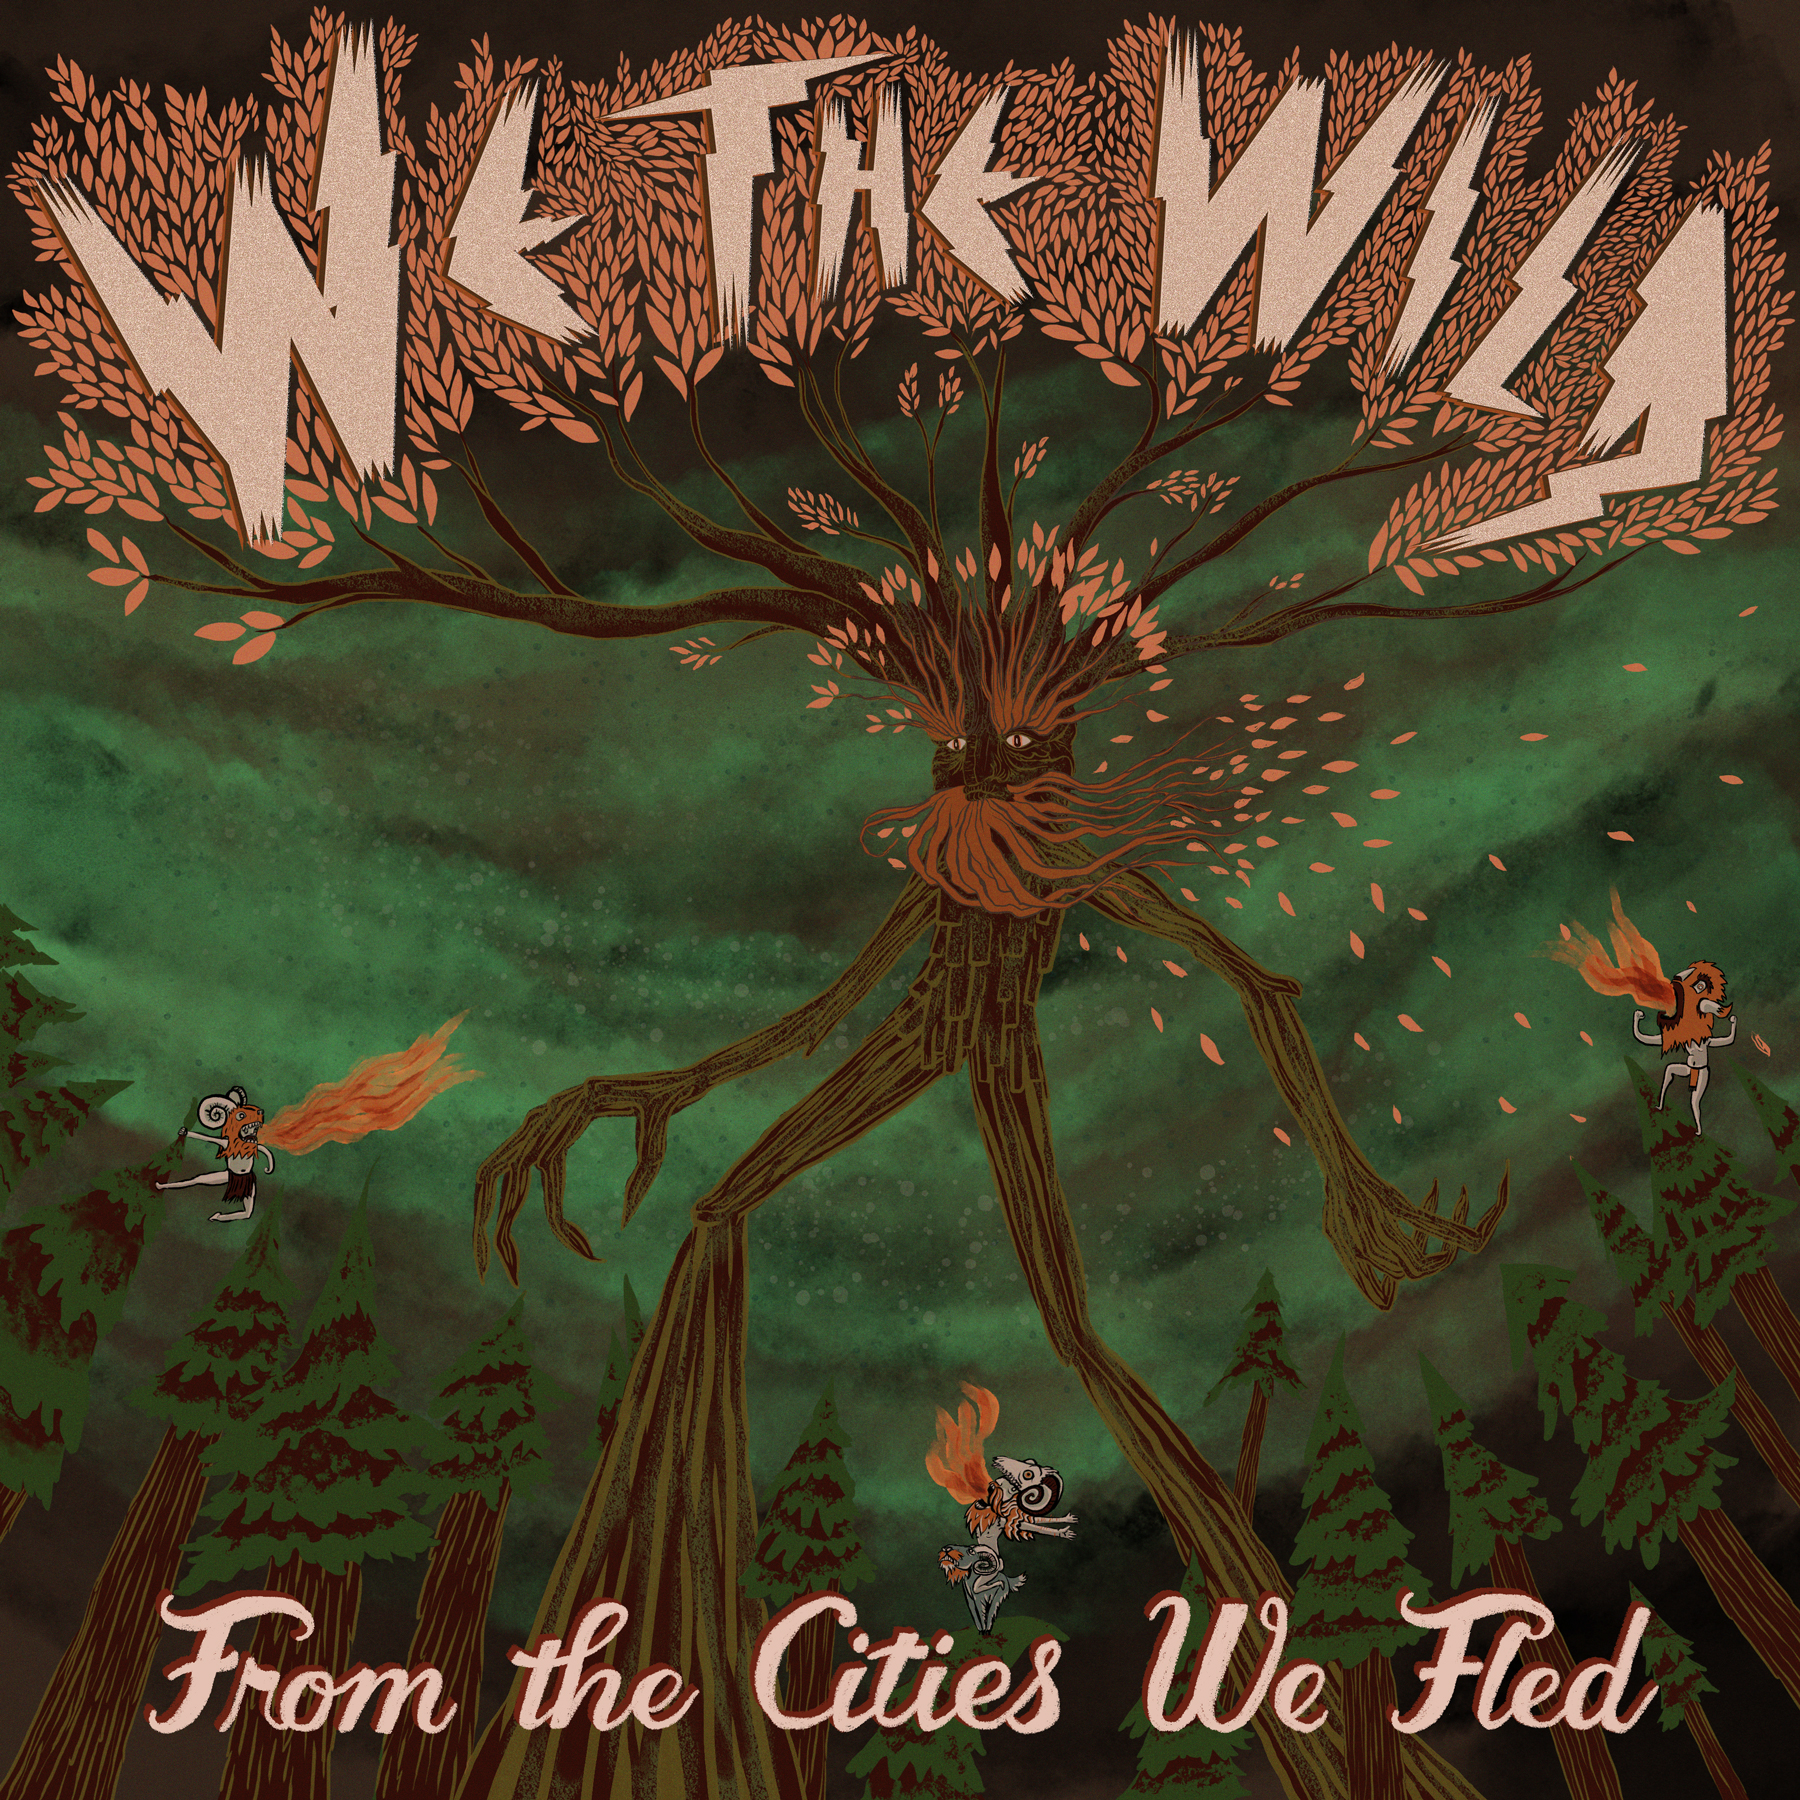 We The Wild - From the Cities We Fled